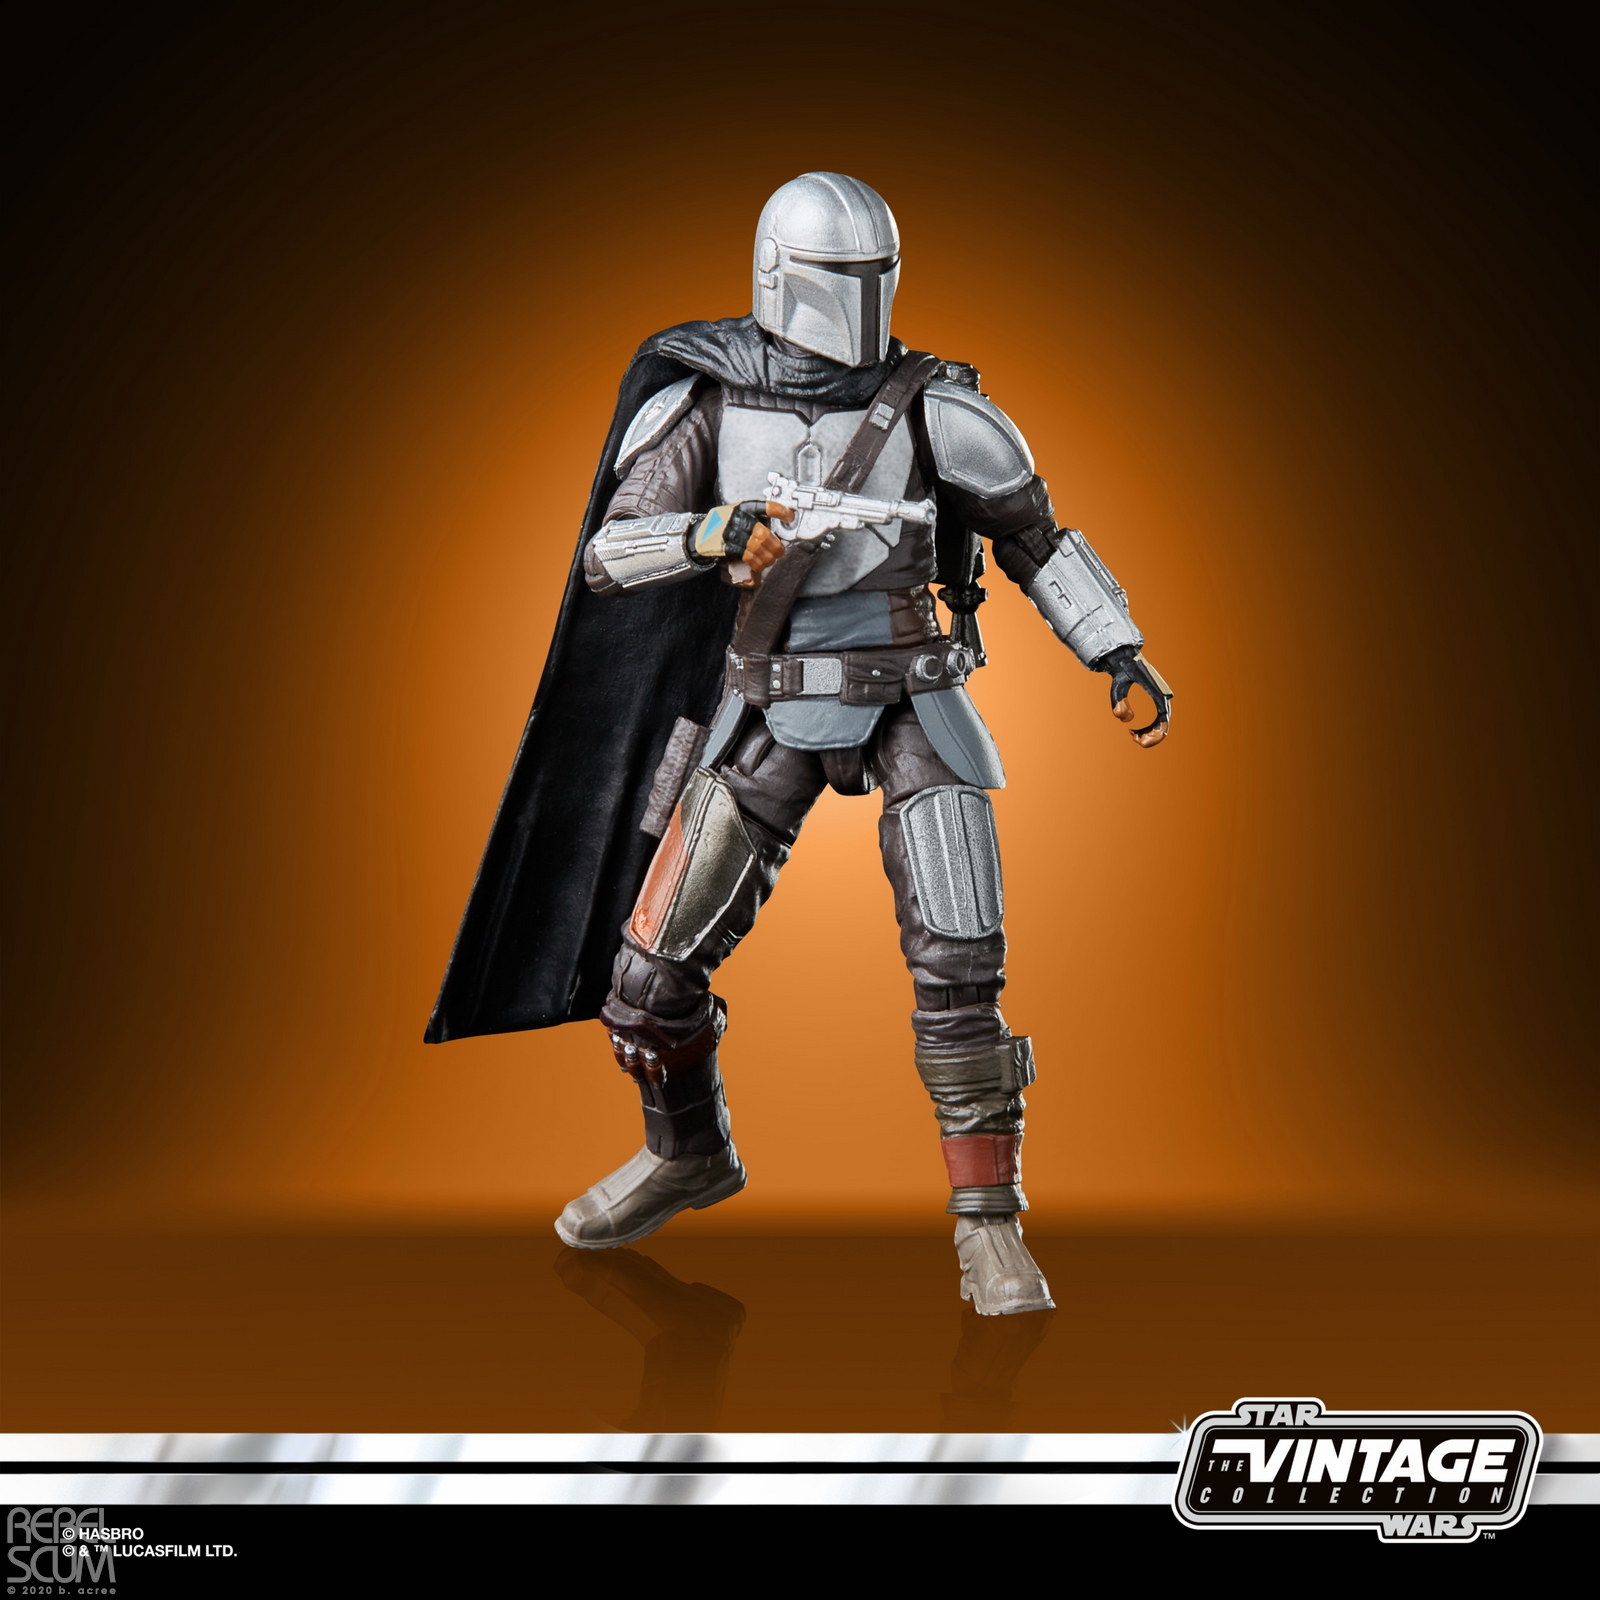 STAR WARS THE VINTAGE COLLECTION 3.75-INCH THE MANDALORIAN - oop (5).jpg